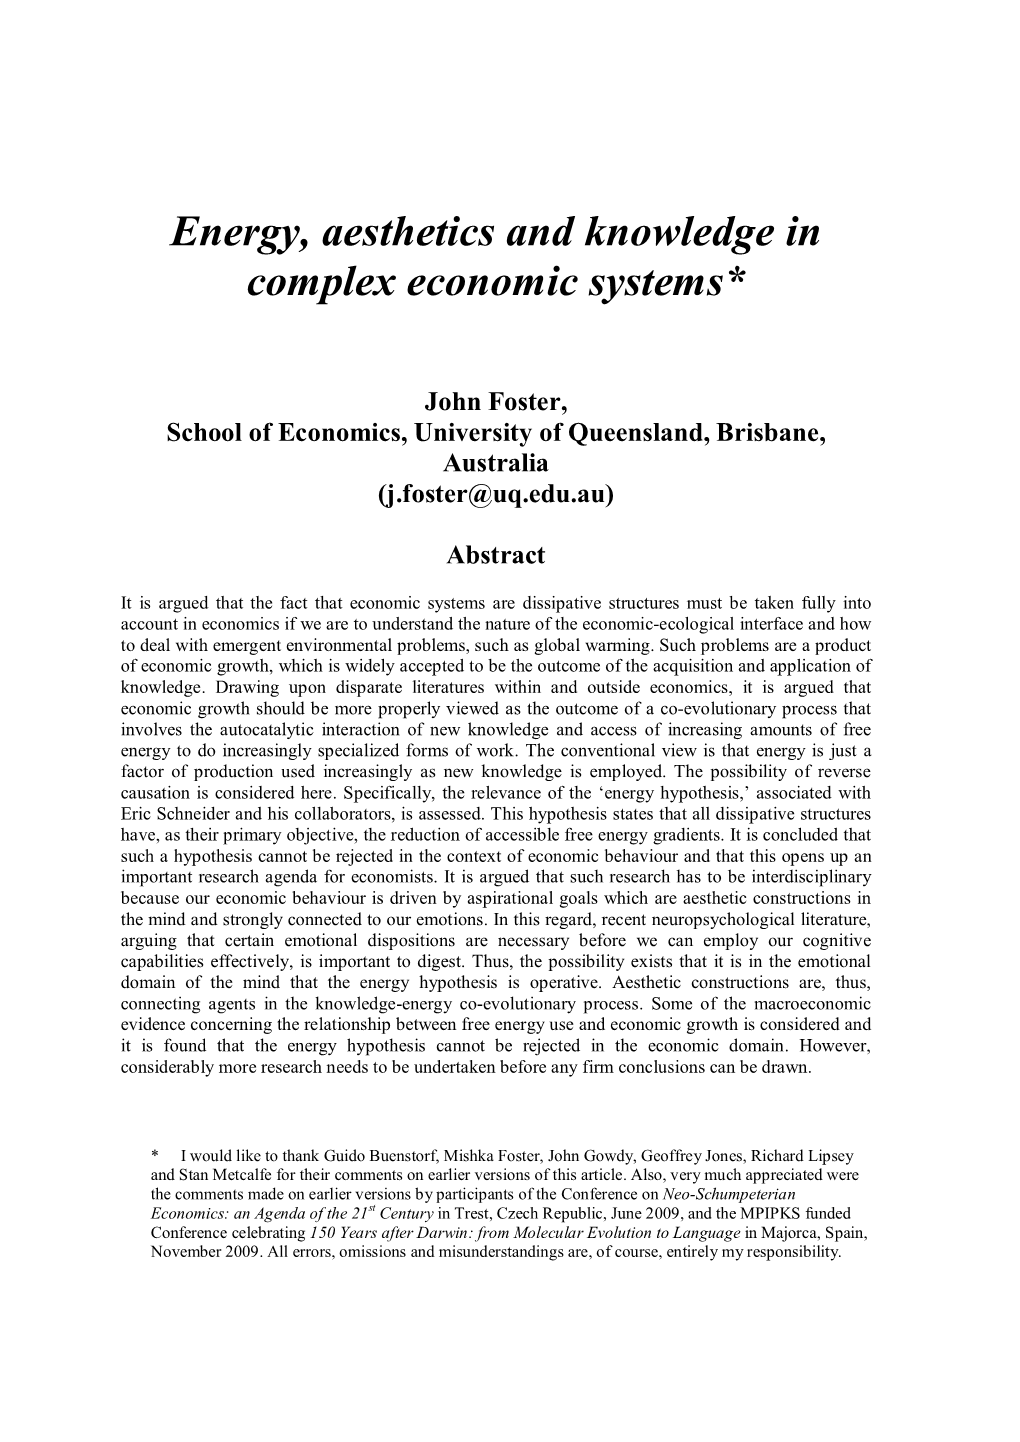 Energy, Aesthetics and Knowledge in Complex Economic Systems*